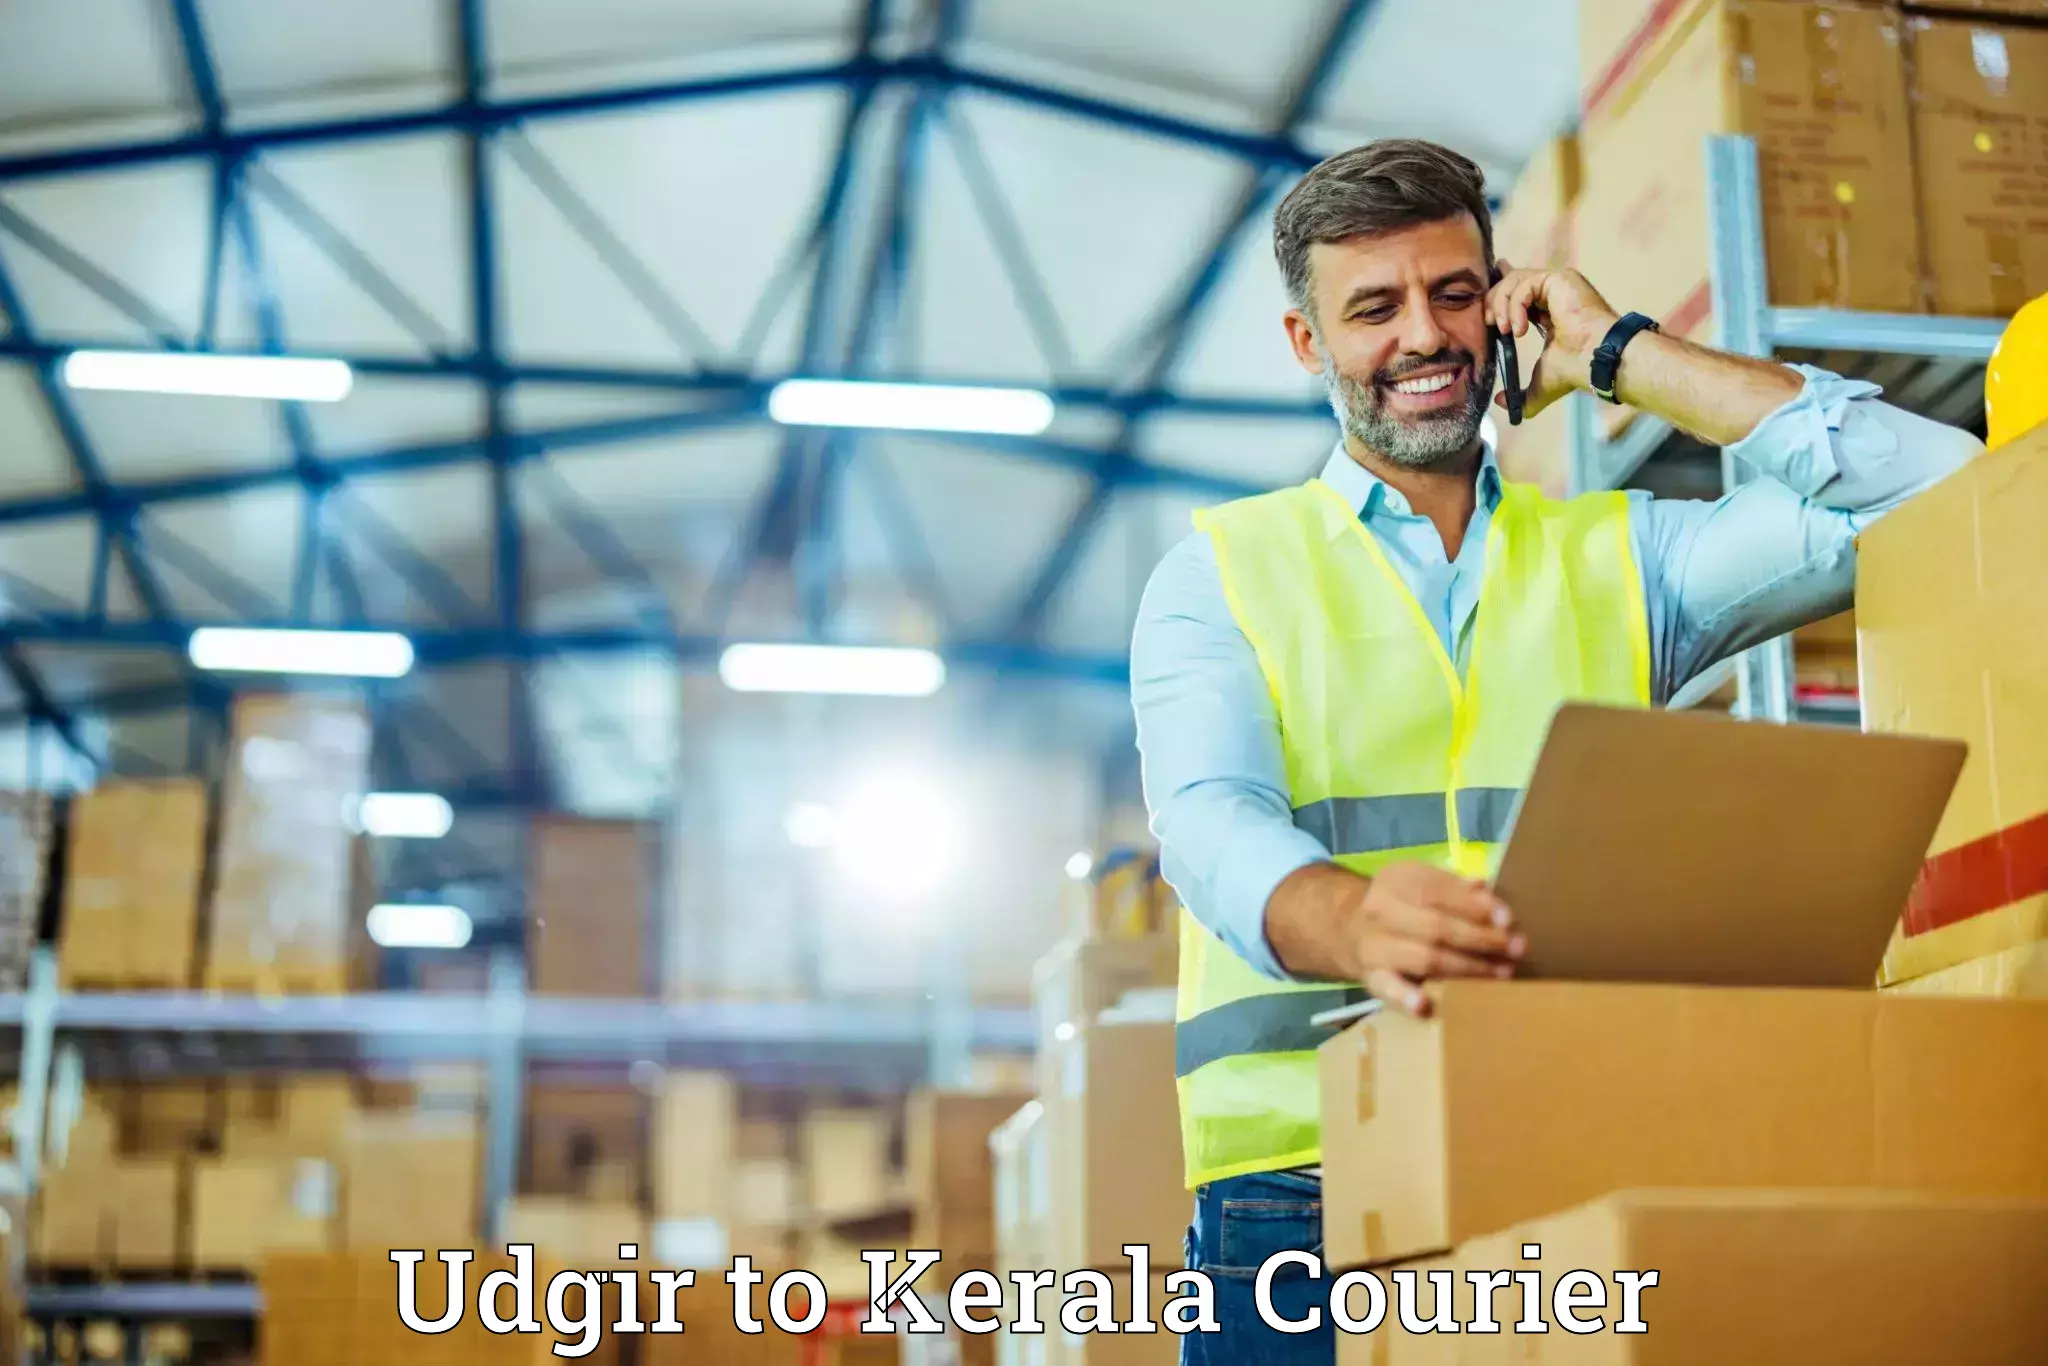 Luggage delivery app Udgir to Kerala